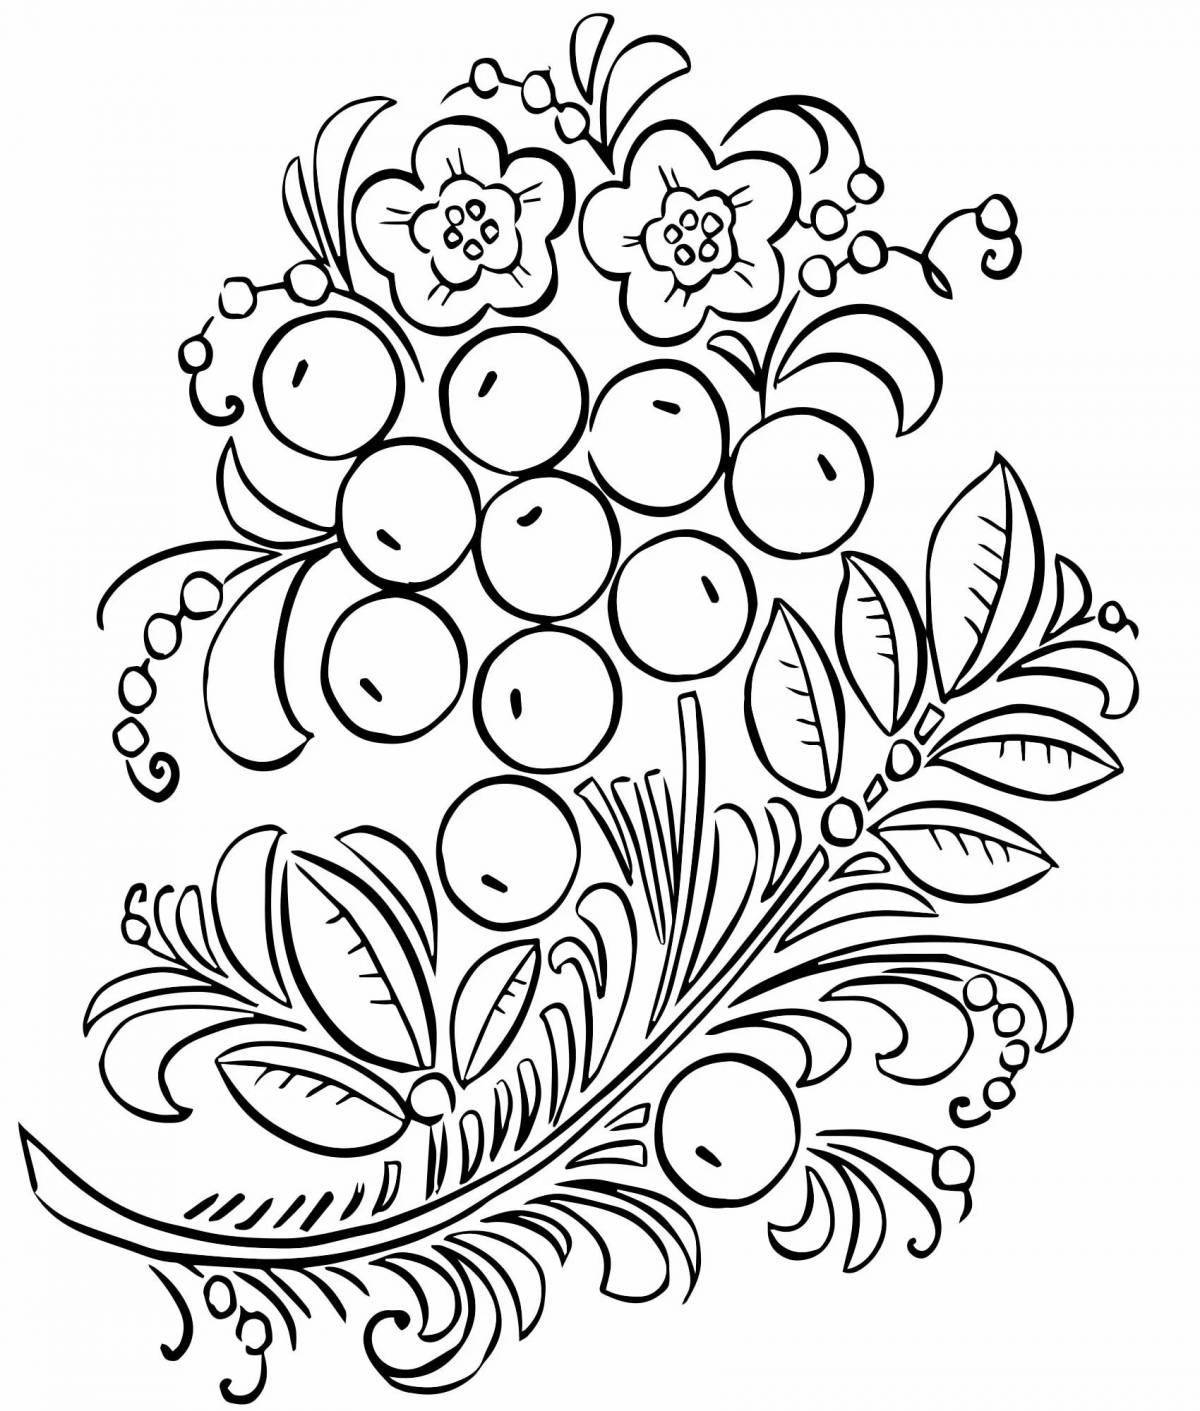 Coloring page intricate Russian folk crafts